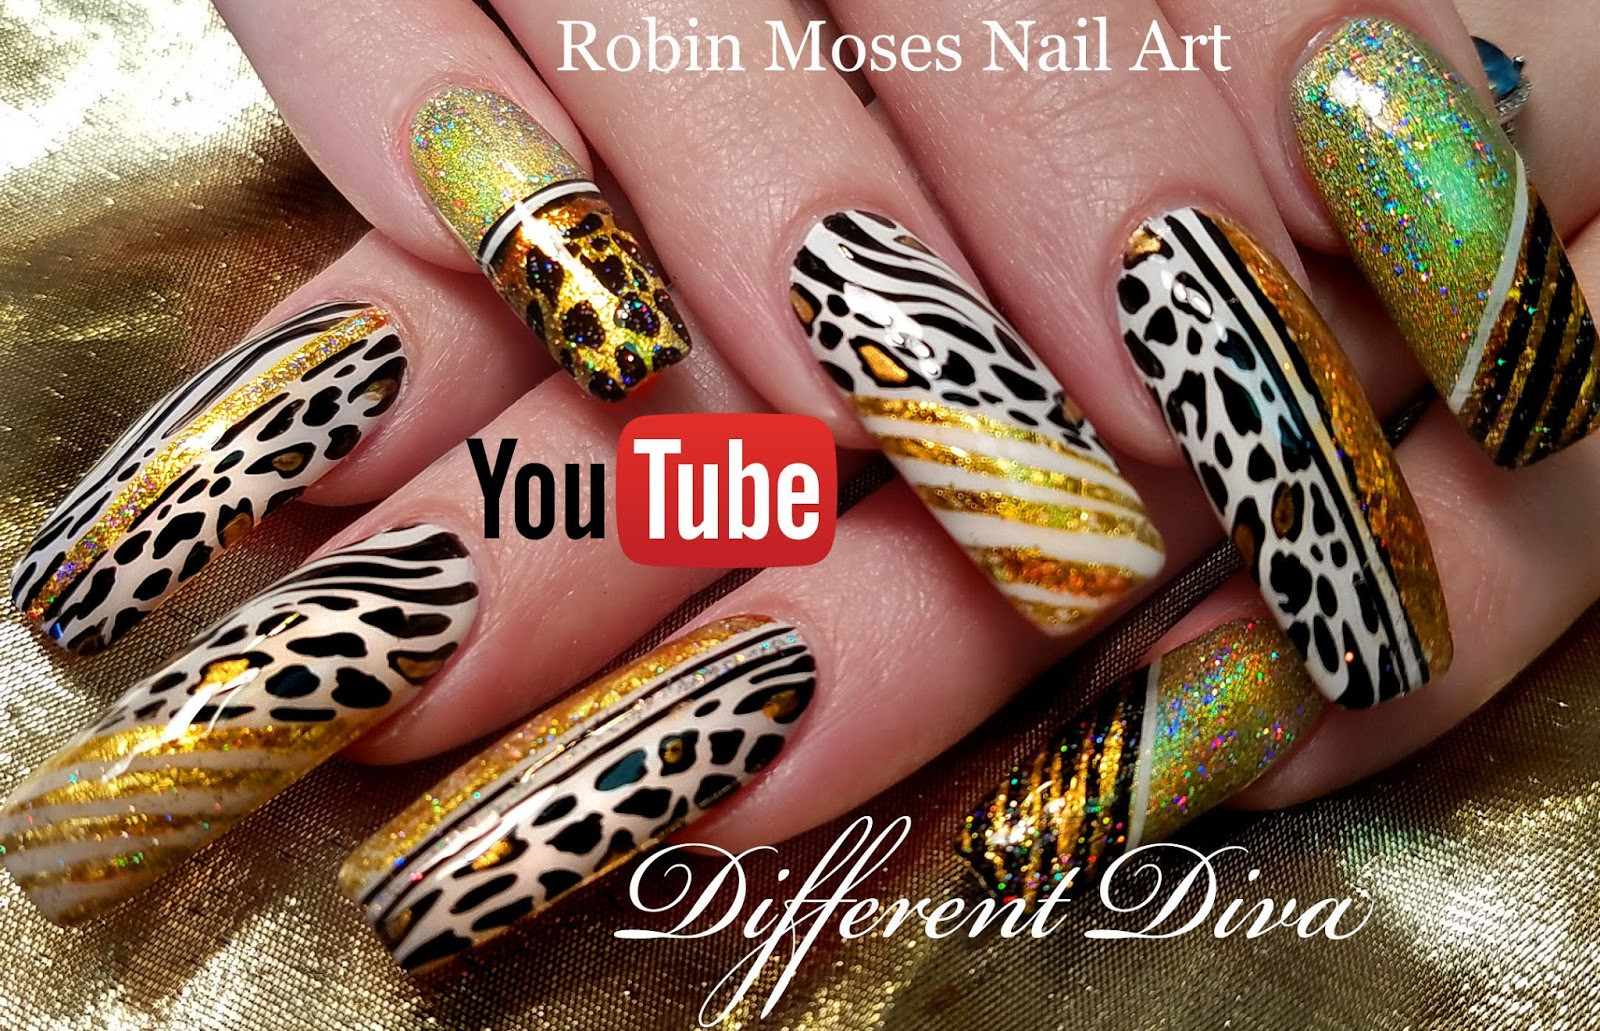 Robin Moses Nail Art Brushes - Yahoo Search Results - wide 5